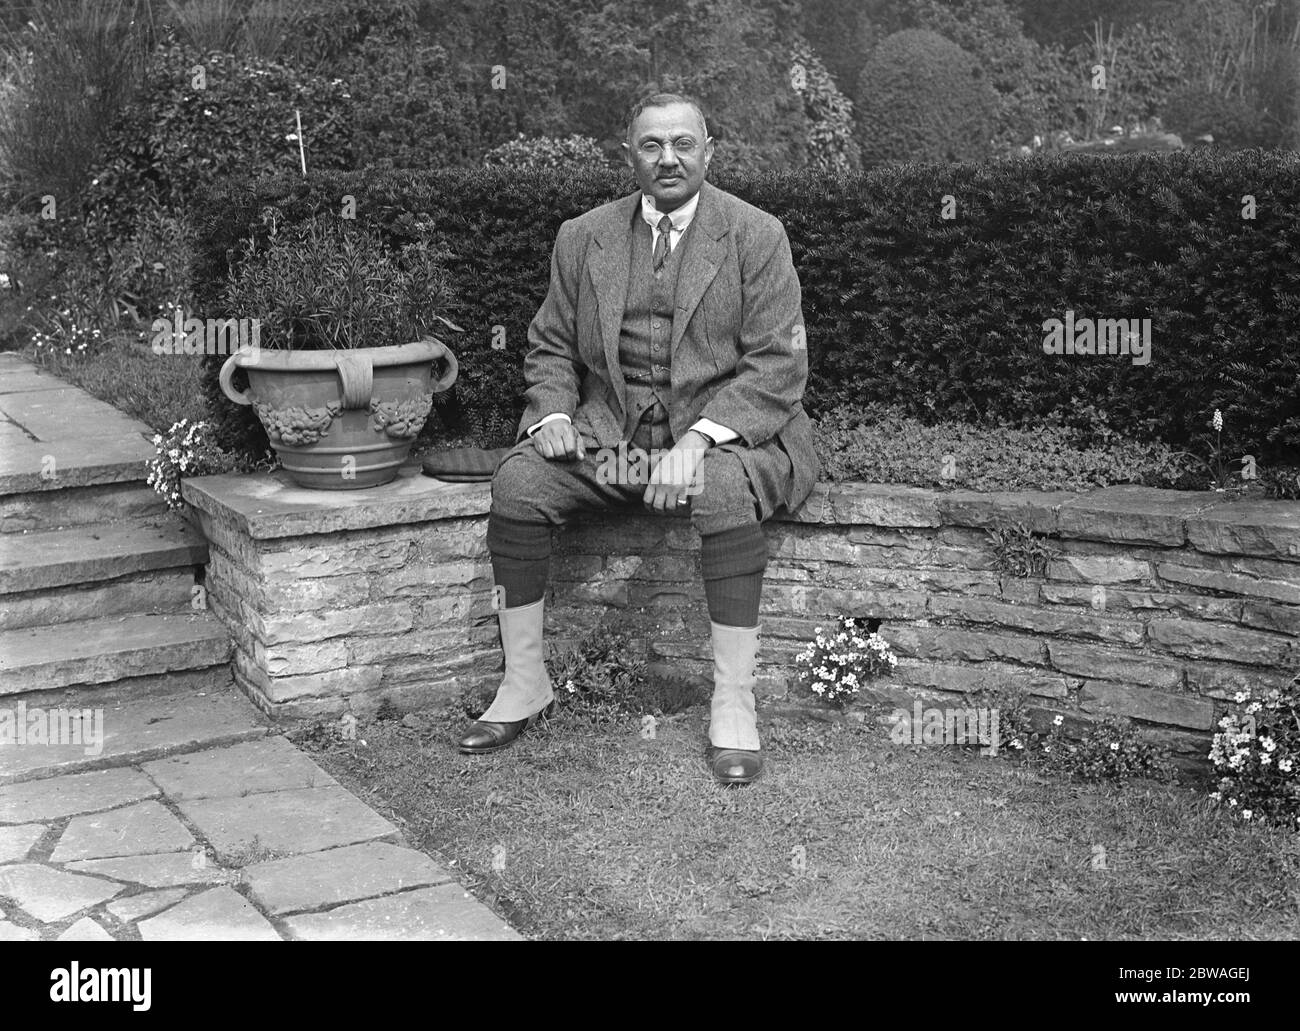 The Maharaj of Nawanagar ( Ranjitsinjhi ) At his home in Staines , Middlesex . 31 March 1923 Ranjitsinhji Vibhaji, Maharaja Jam Sahib of Nawanagar GCSI, GBE (10 September 1872 - 2 April 1933) (known as K.S. Ranjitsinhji, Ranji or Smith during his career) was an Indian prince and Test cricketer who played for the English cricket team. He also played first-class cricket for Cambridge University, and county cricket for Sussex. Legendary batsman Stock Photo